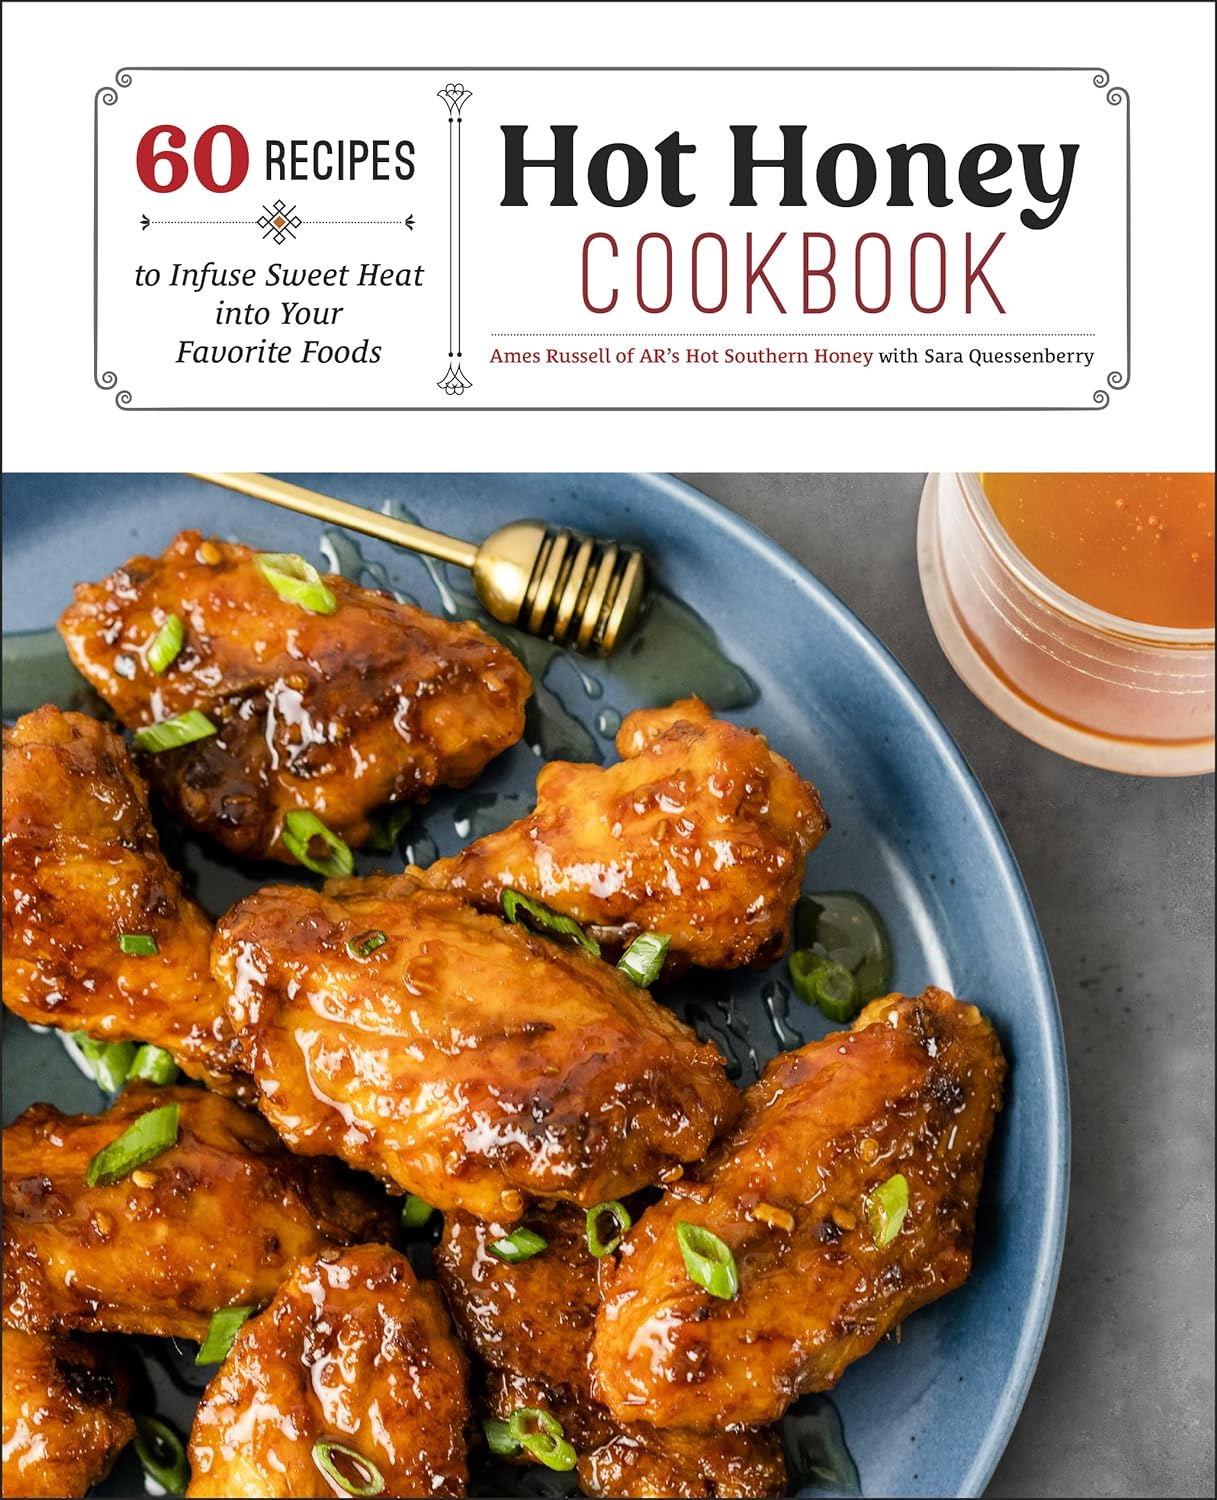 Hot Honey Cookbook: 60 Recipes to Infuse Sweet Heat into Your Favorite Foods - Findlay Rowe Designs